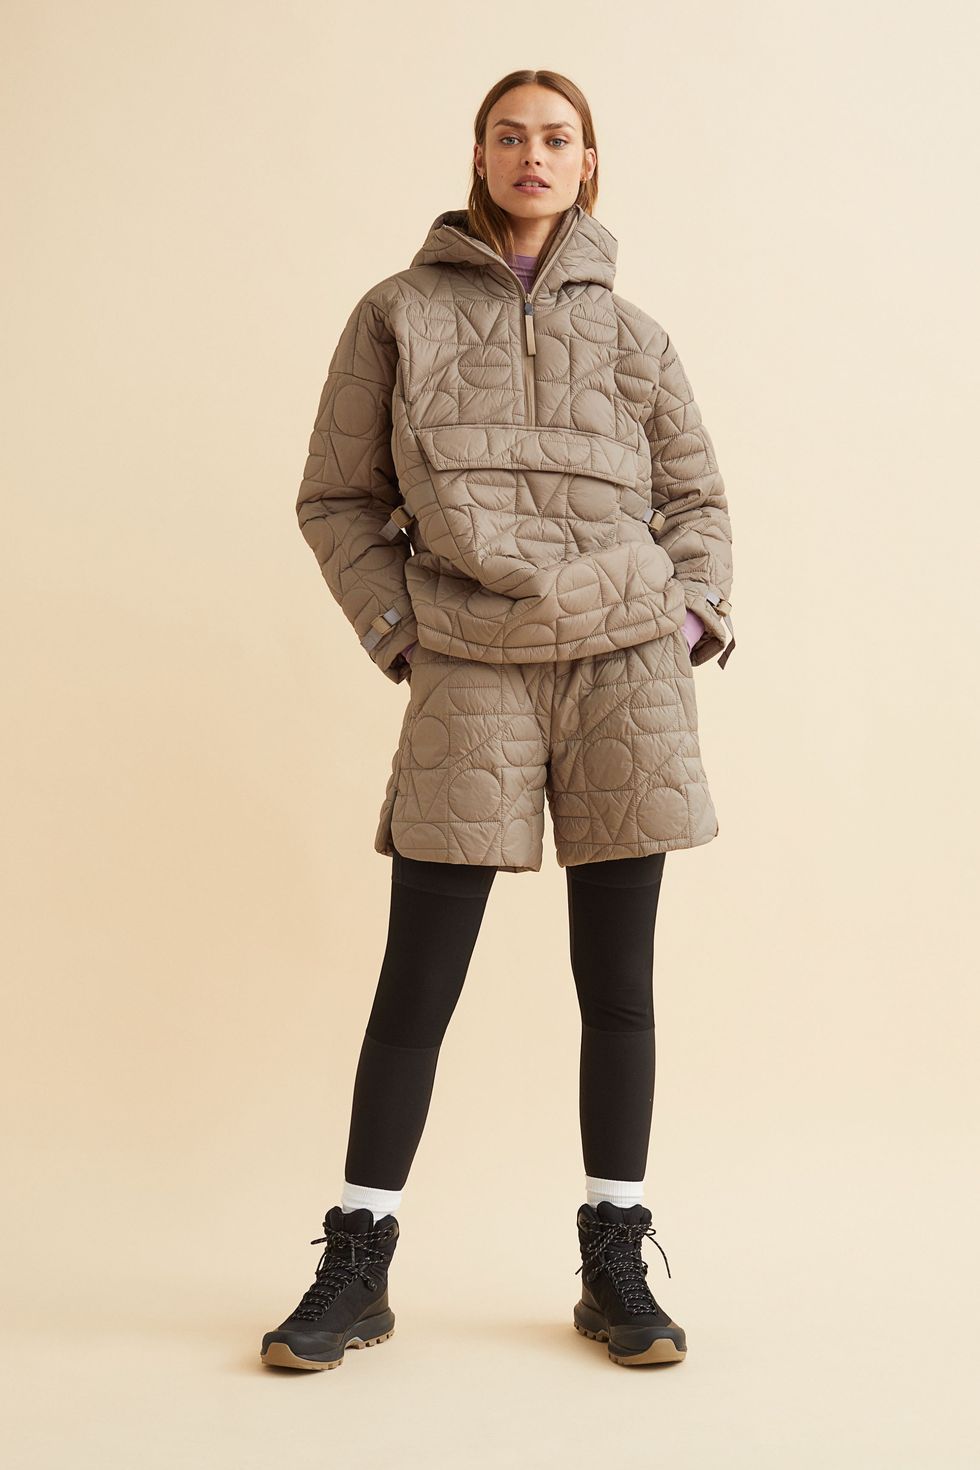 27 of the Best Puffer Coats to Shop 2023